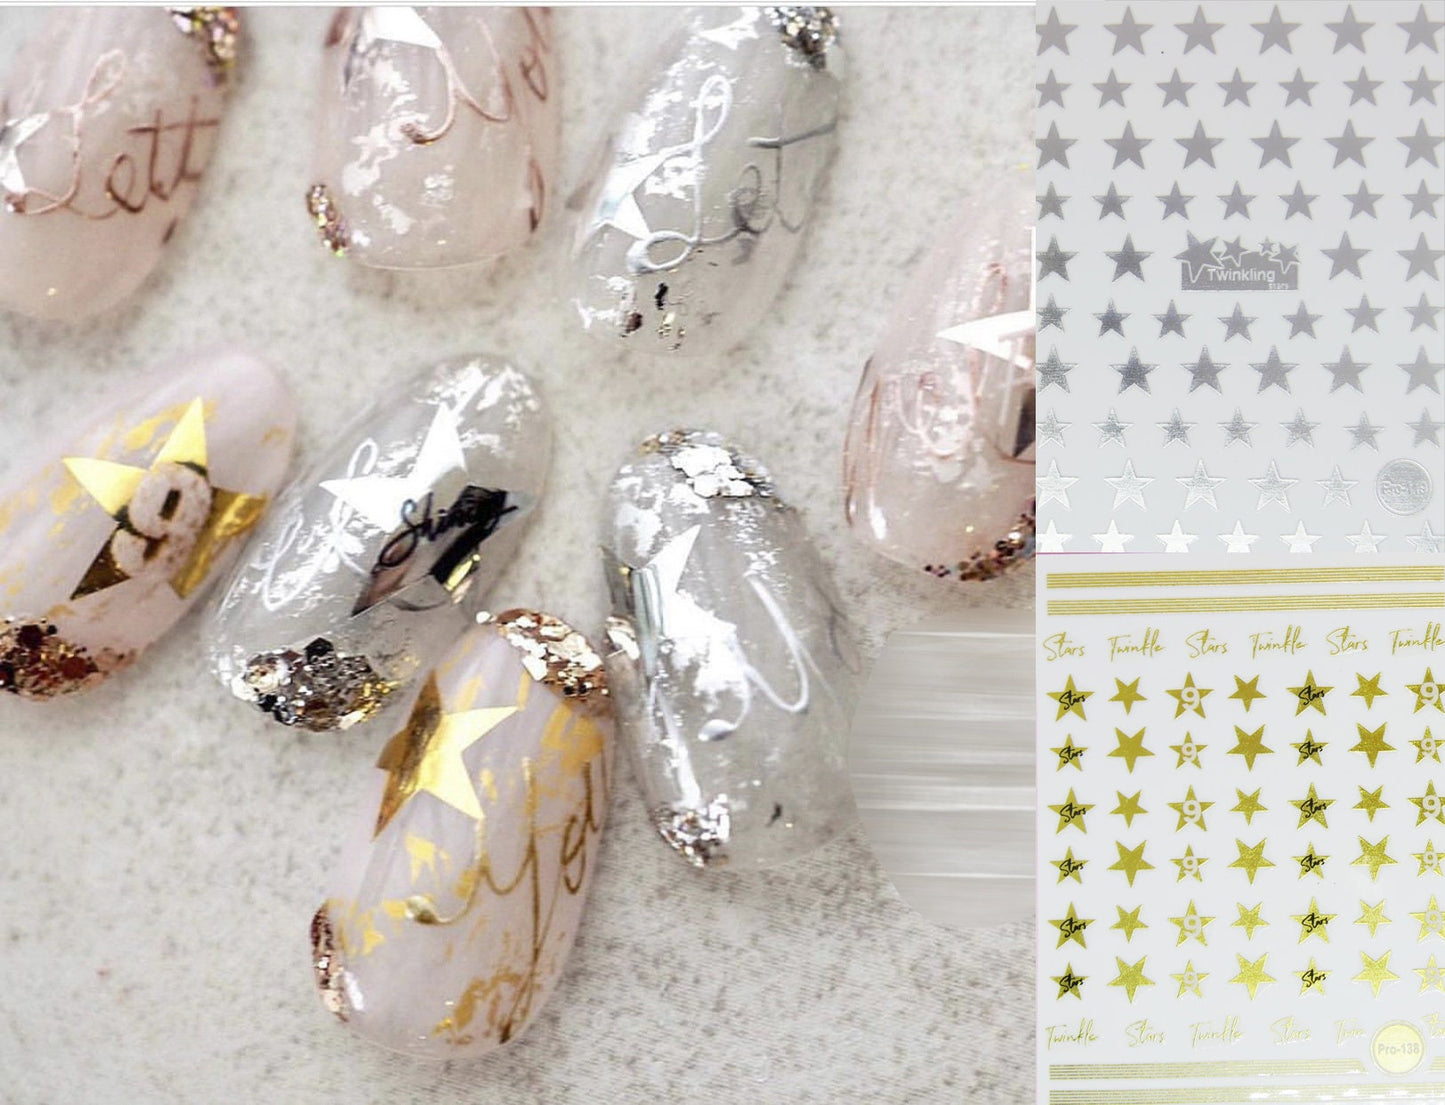 Ultra Thin Star Nail Sticker/ Gold Silver Five Pointed Star Nail Art Stickers Self Adhesive Decals/ Metallic star pro nail art sticker